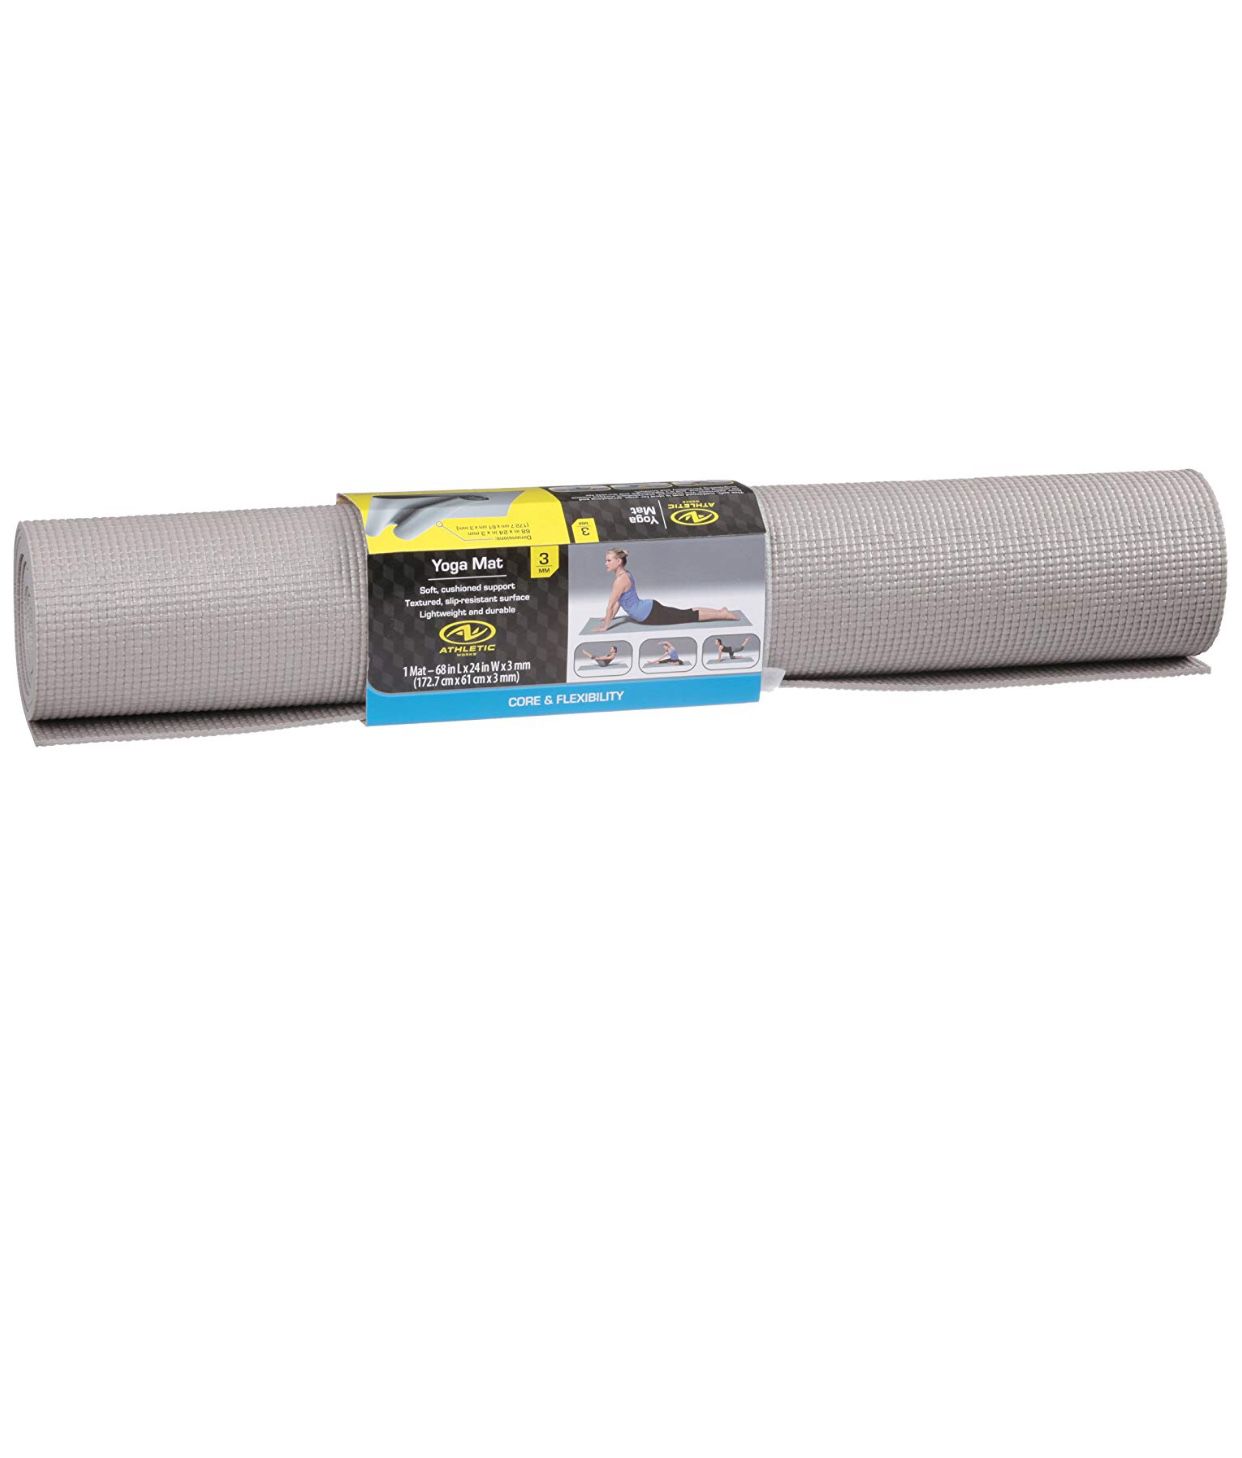 Athletic Yoga Mat light grey in color